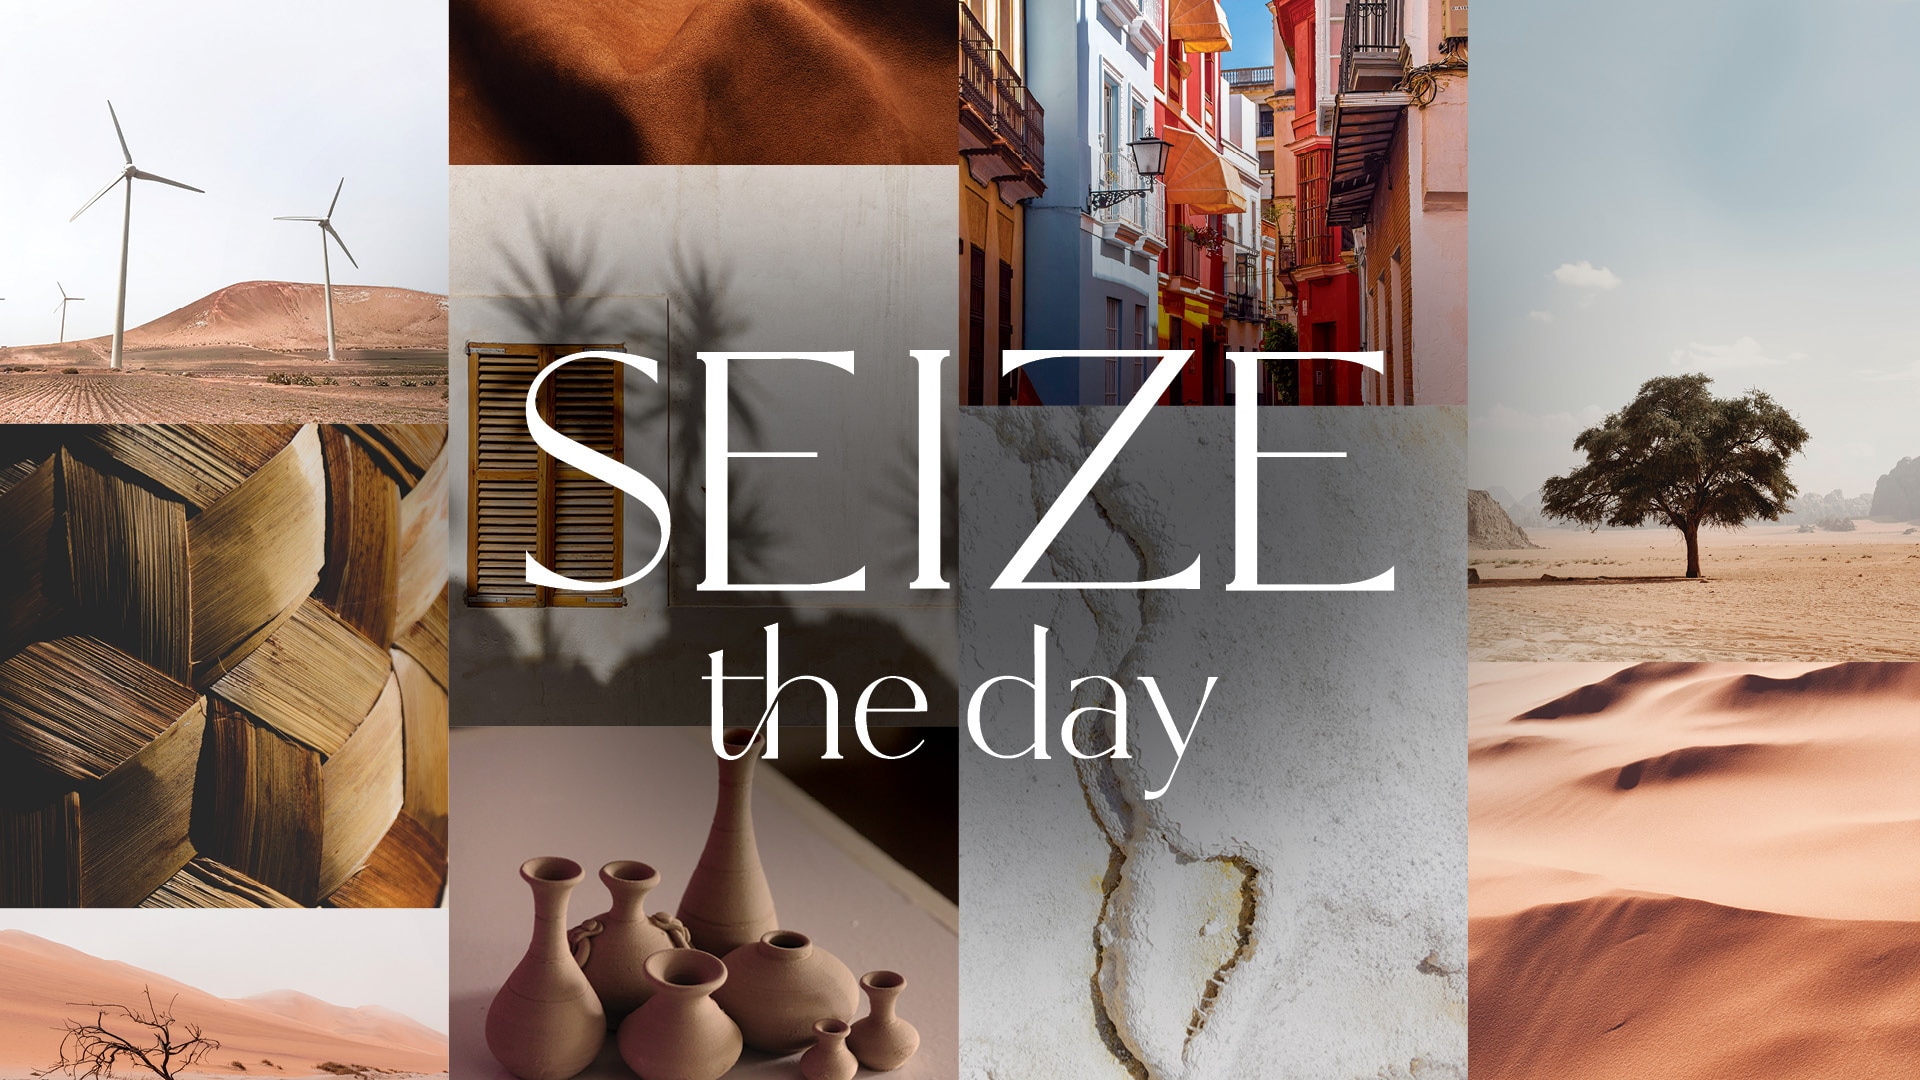 DAL_Seize-The-Day_collage_banner